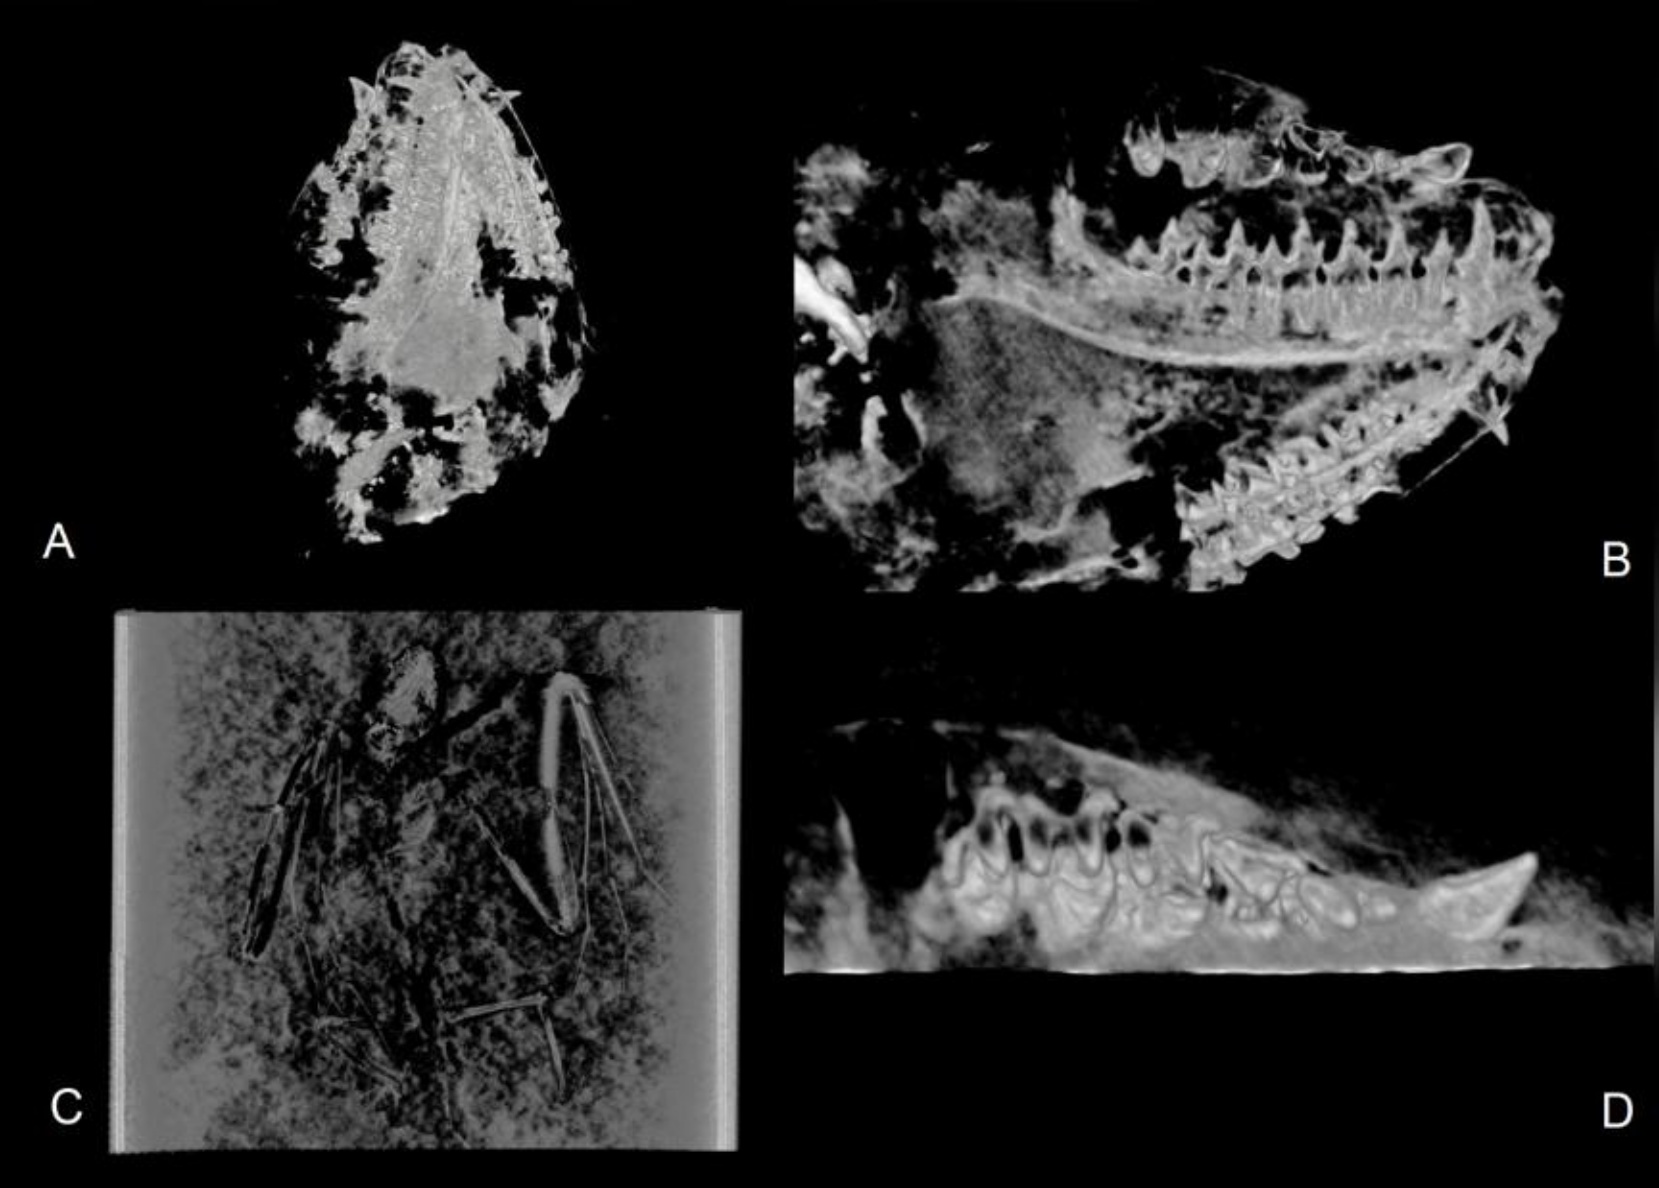 Shown here are CT visualizations of Icaronycteris gunnelli, including the following views: A) ventral view skull; B) labial view of right dentary; C) Dorsal view skeleton; D) Occlusal view of right maxilla.